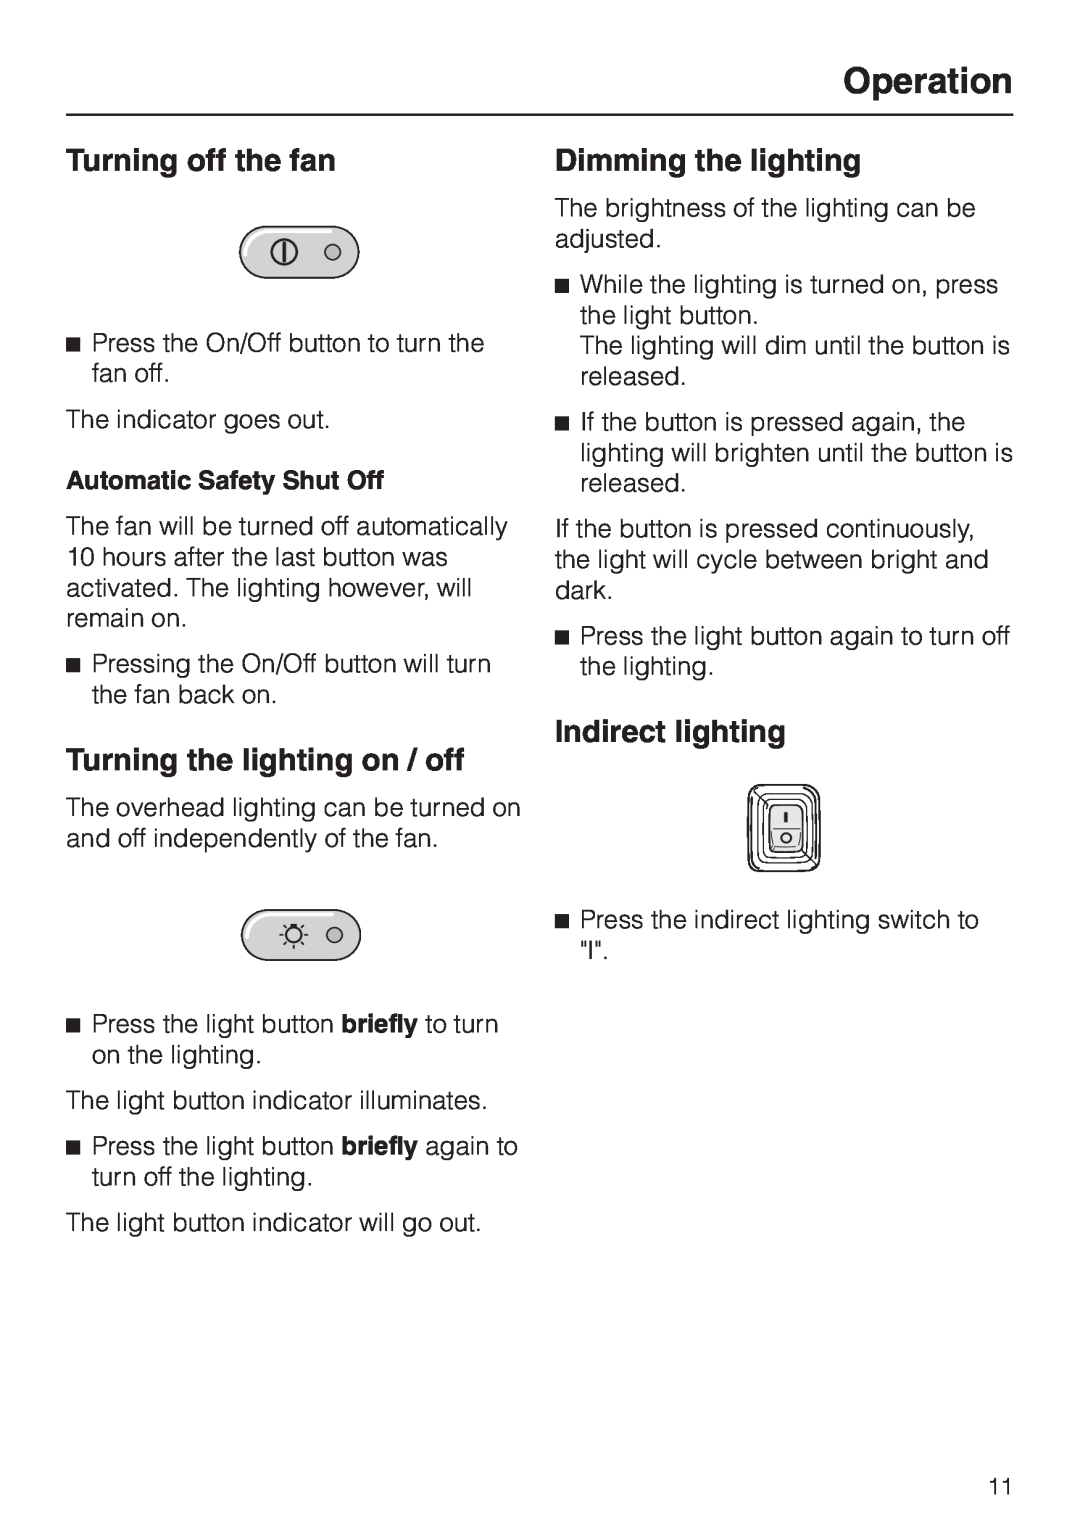 Miele DA 251 Turning off the fan, Turning the lighting on / off, Dimming the lighting, Indirect lighting, Operation 